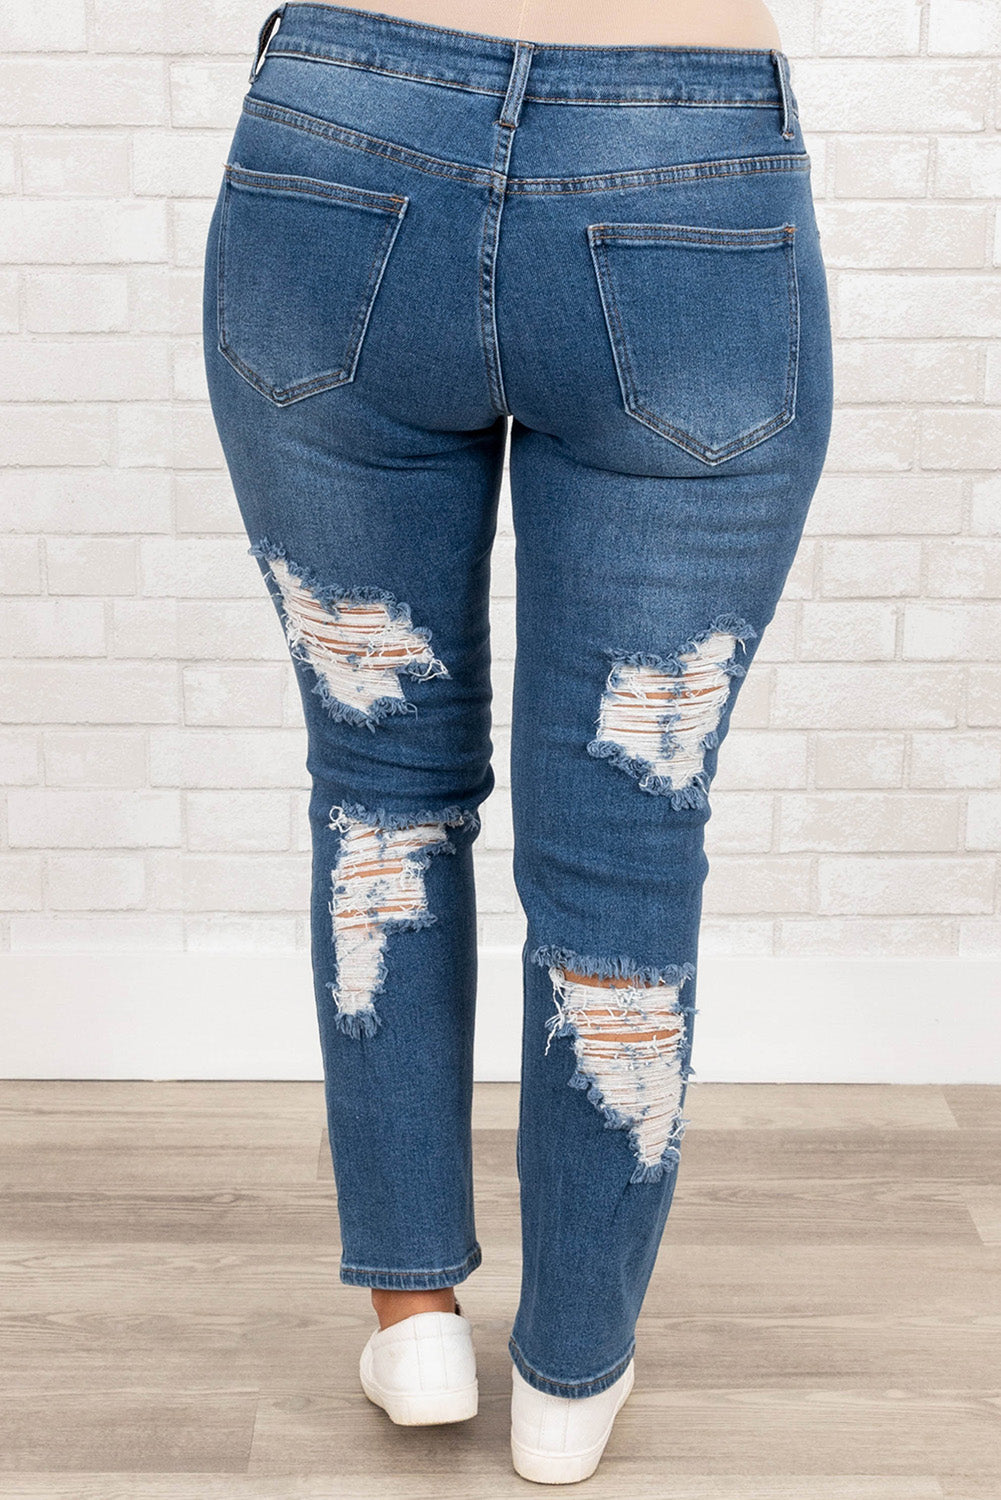 Plus Size Distressed Ripped Skinny Jeans